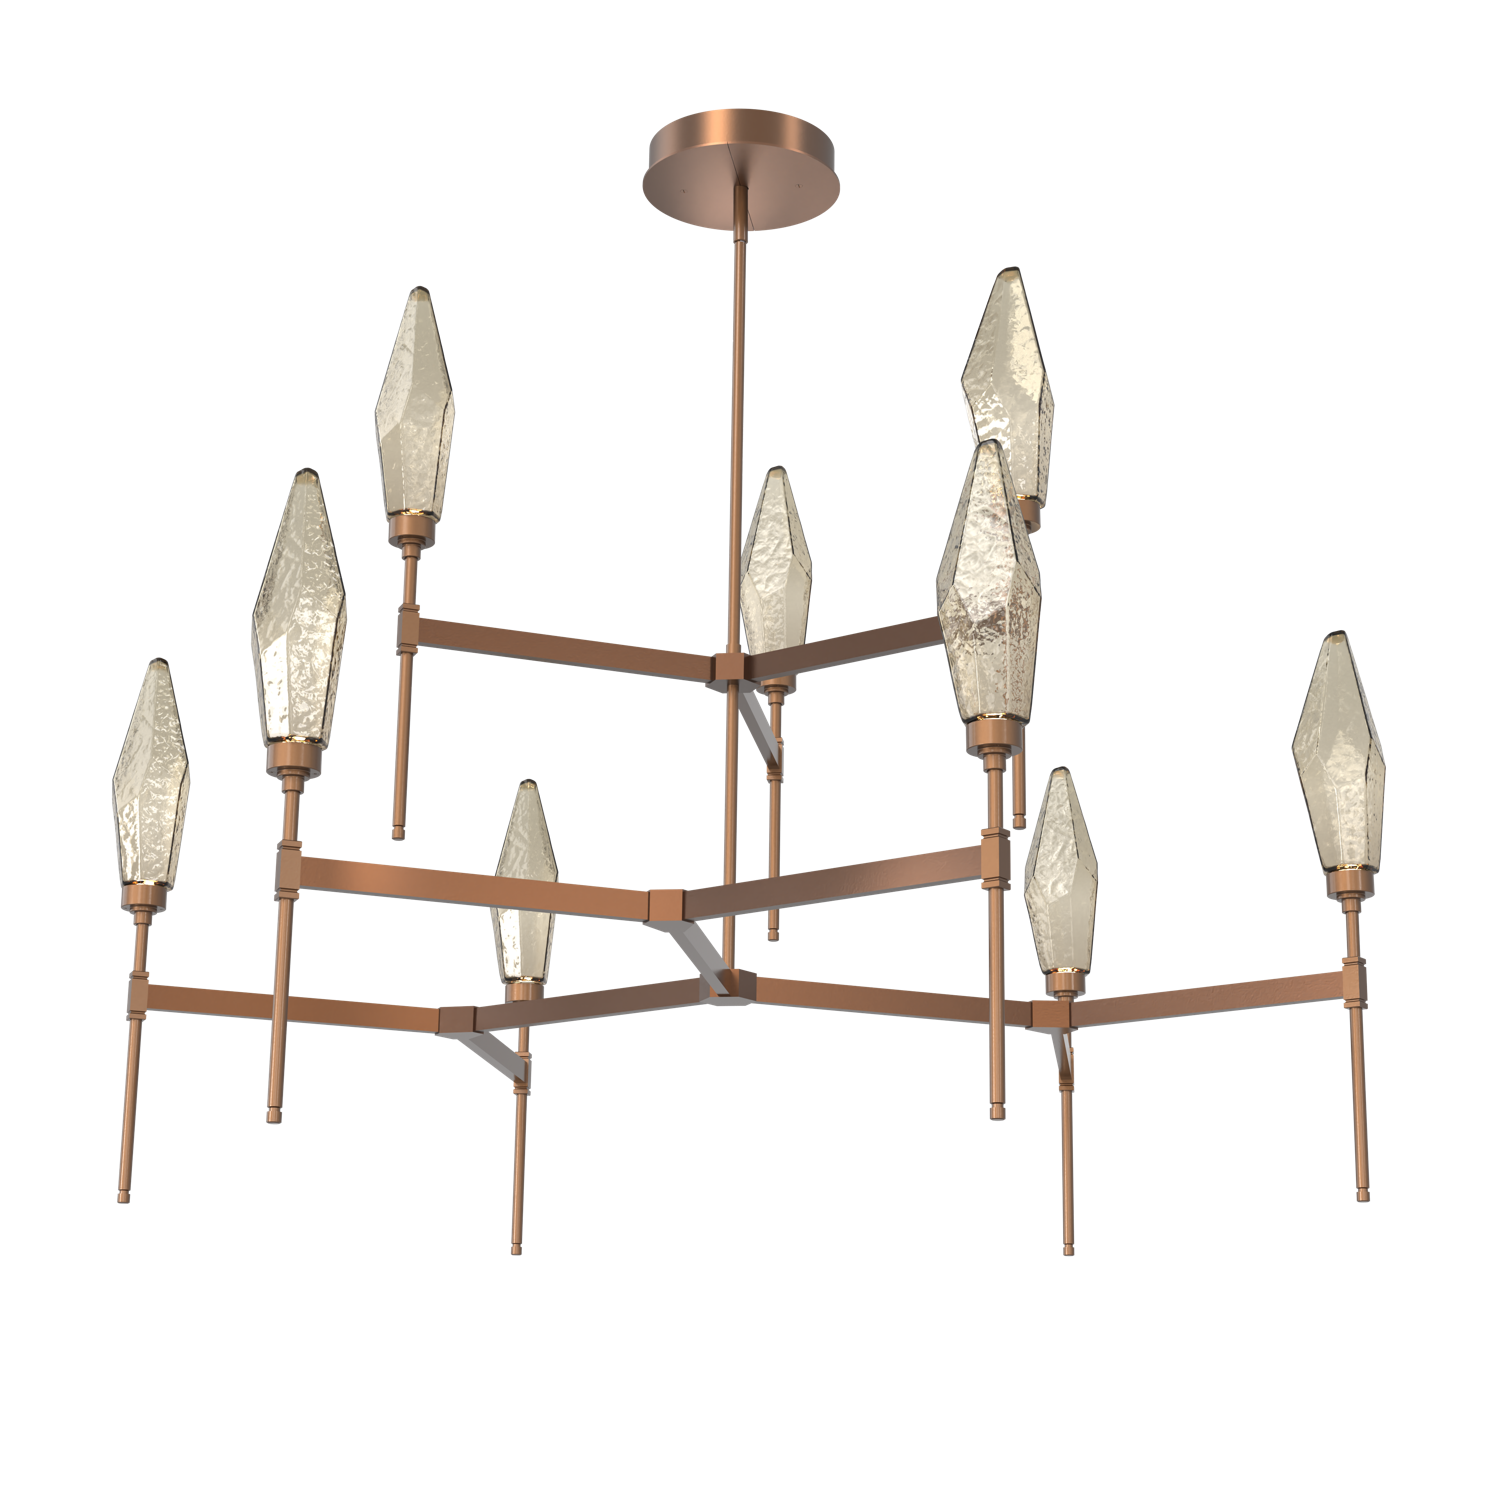 CHB0050-54-BB-CB-Hammerton-Studio-Rock-Crystal-54-inch-round-two-tier-belvedere-chandelier-with-burnished-bronze-finish-and-chilled-bronze-blown-glass-shades-and-LED-lamping